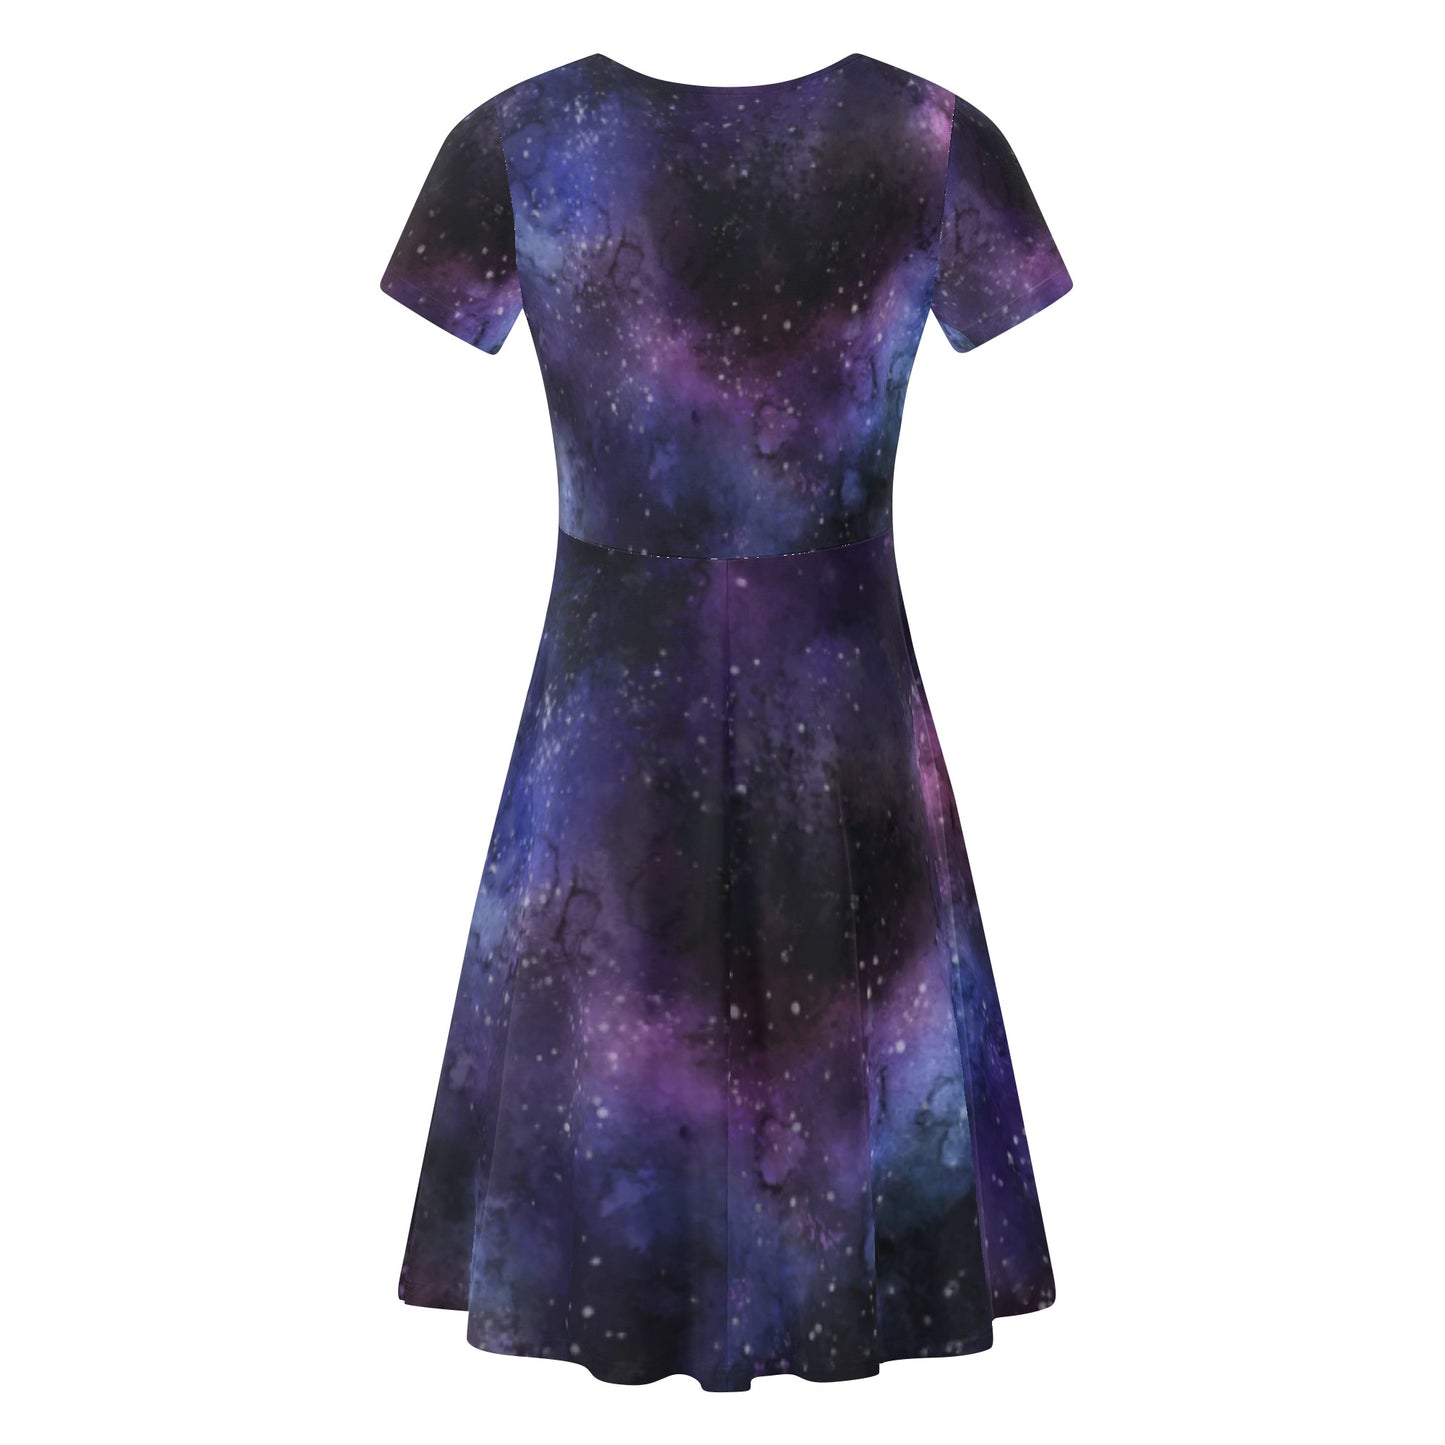 Galaxy Women's Short Sleeve Ruffle Midi Dress, Universe Outer Space Celestial Stars Print Evening Cocktail Party Cute Handmade Sexy Dress Starcove Fashion